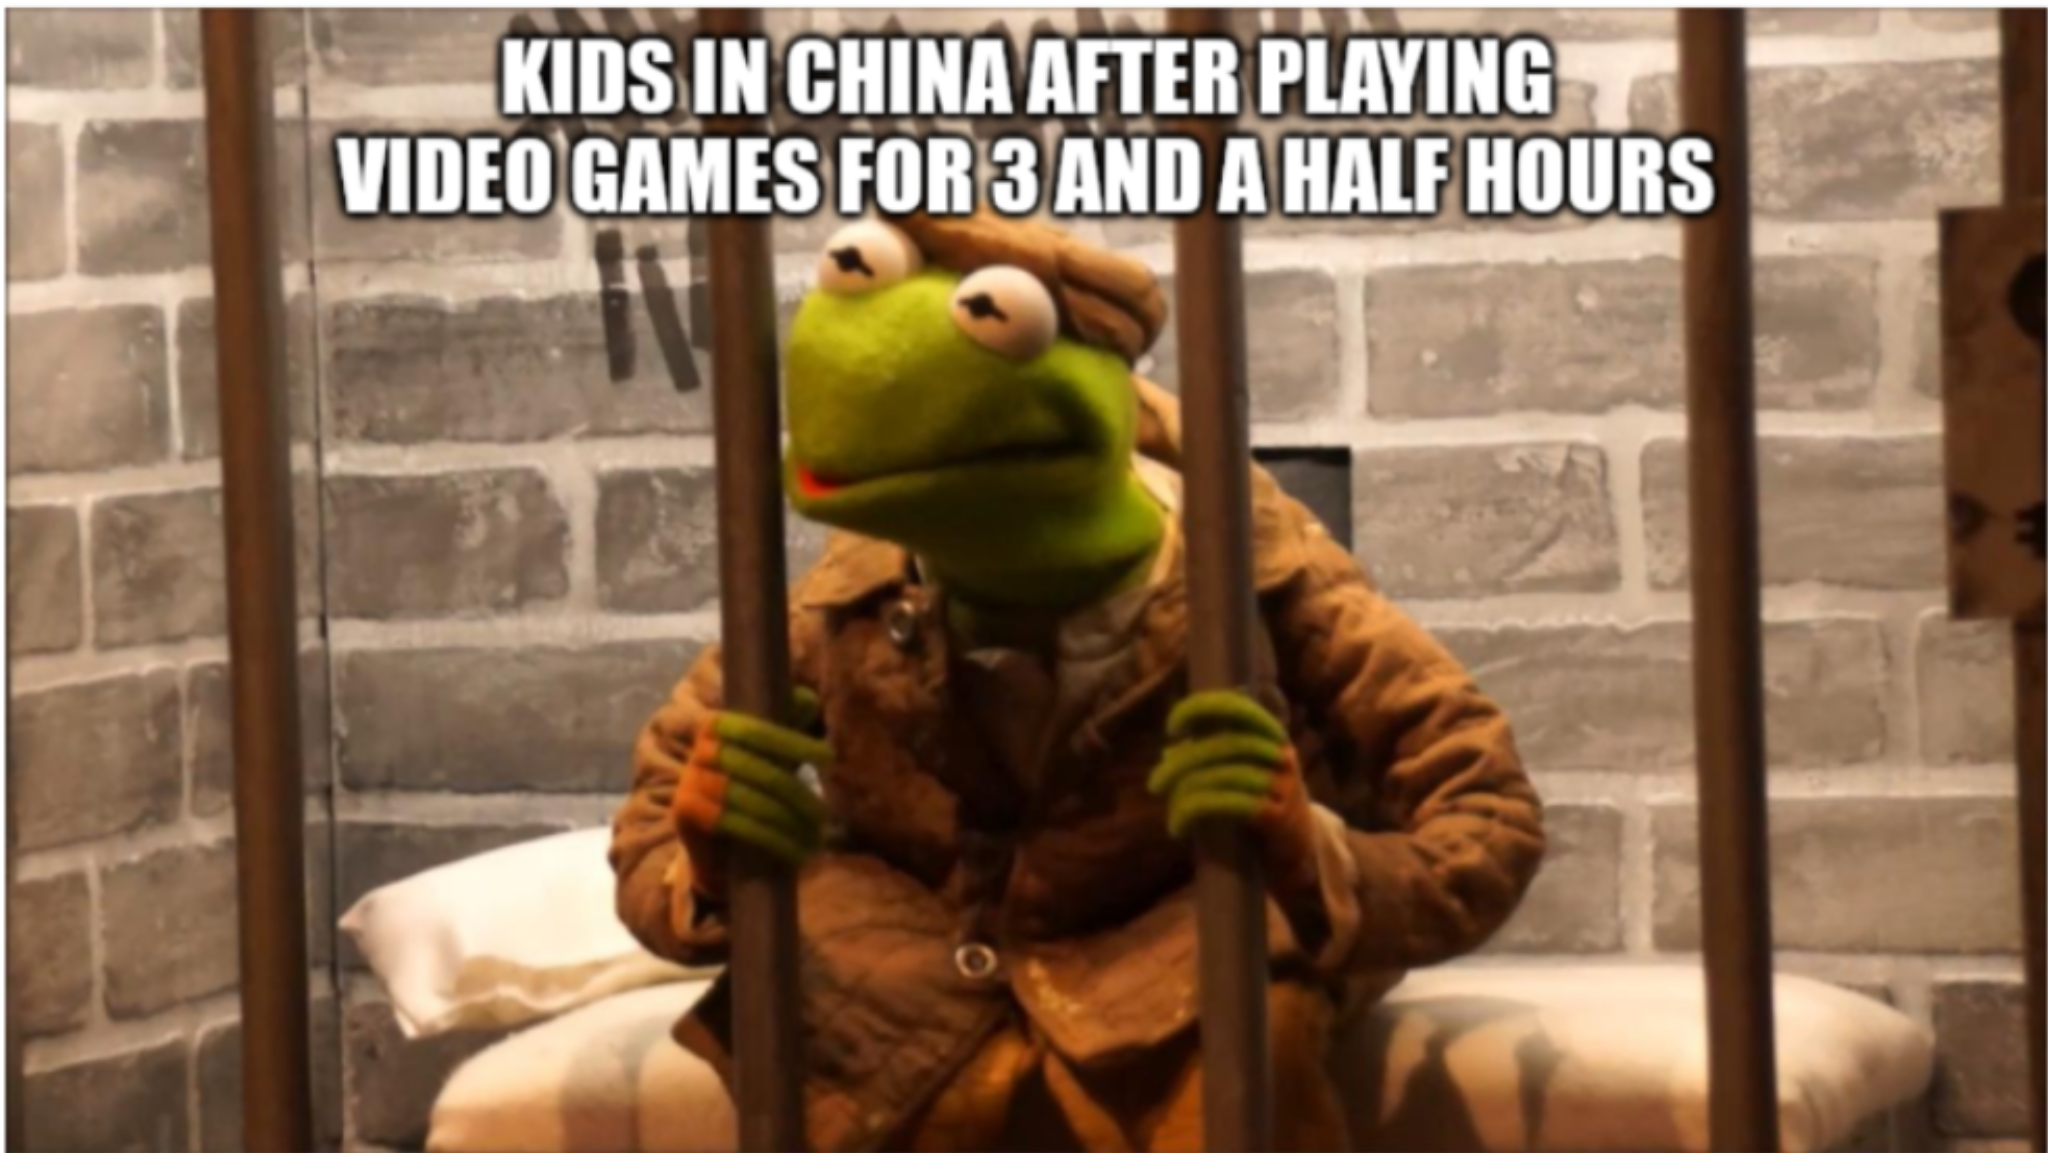 kermit prison - Kids In China After Playing Video Games For 3 And A Half Hours